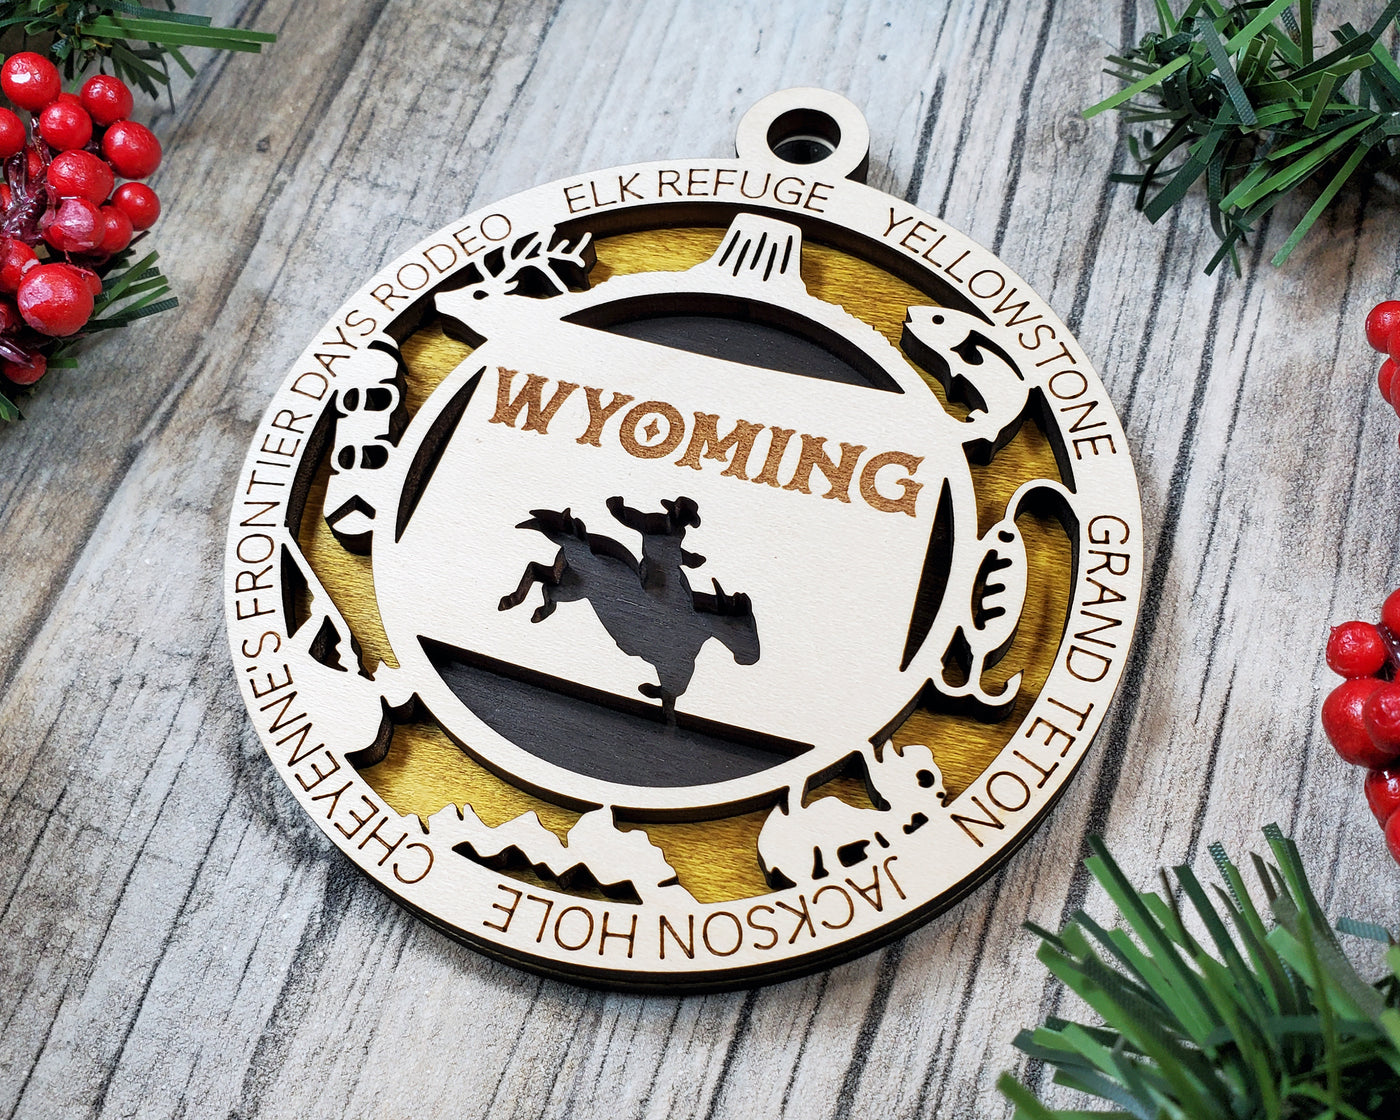 State Ornaments - Wyoming